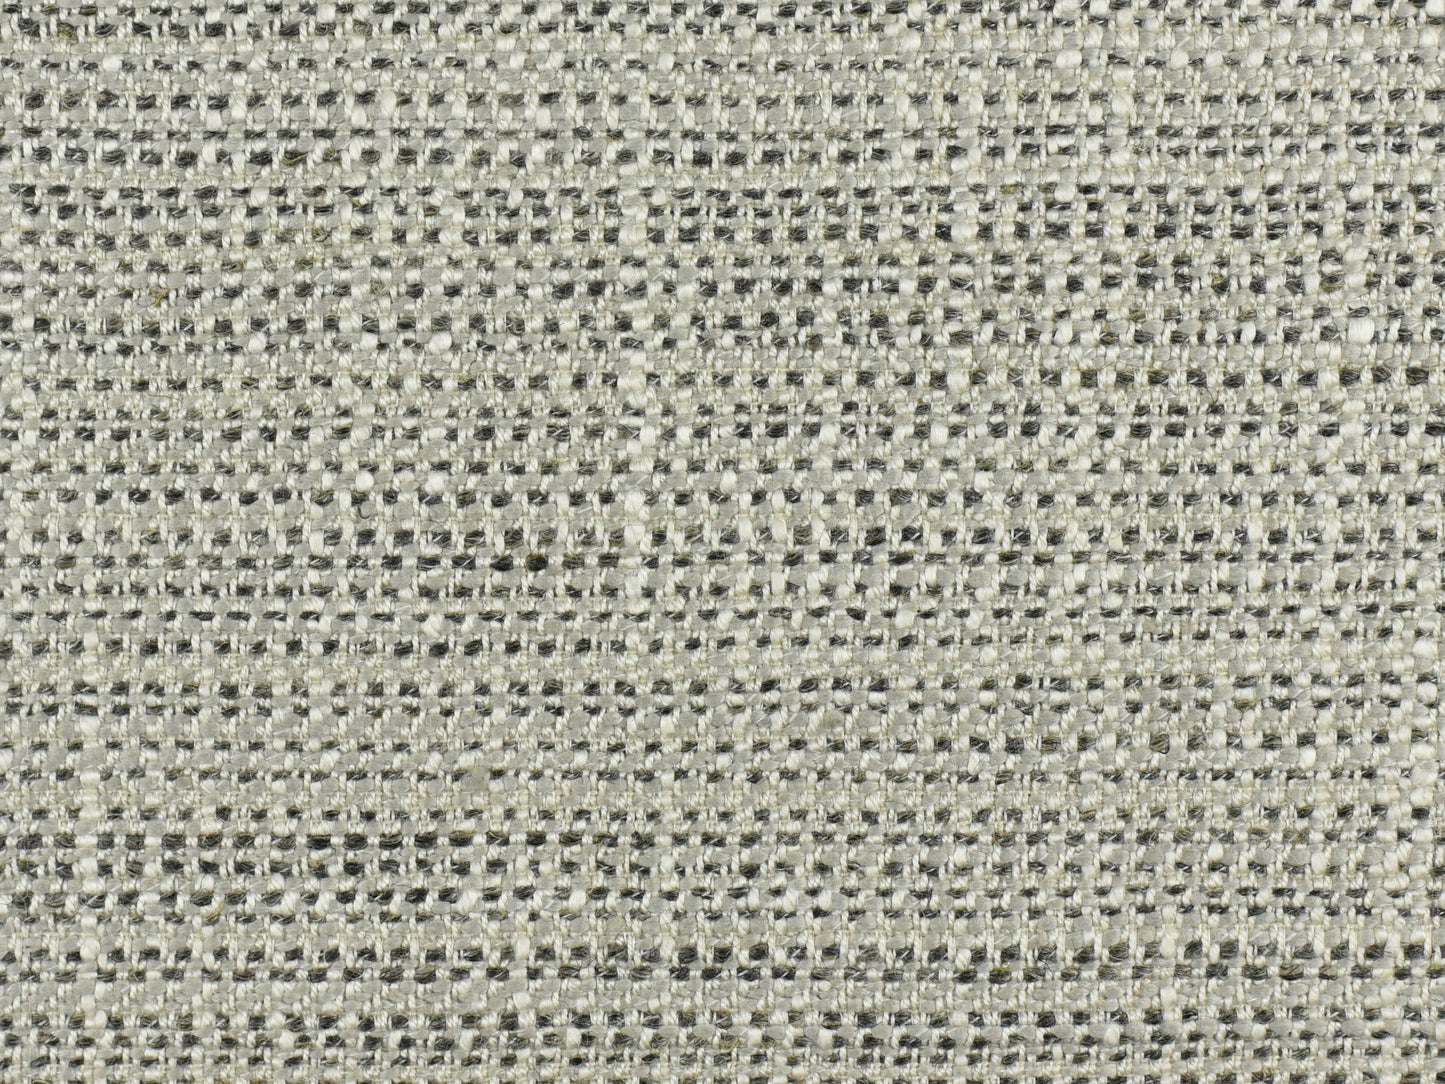 Heavy Duty Linen Blend Strip Woven Design Upholstery Fabric|Linen Fabric By The Yard|Modern Upholstery Fabric For Chair Pillow|57"W/750GSM Thunder